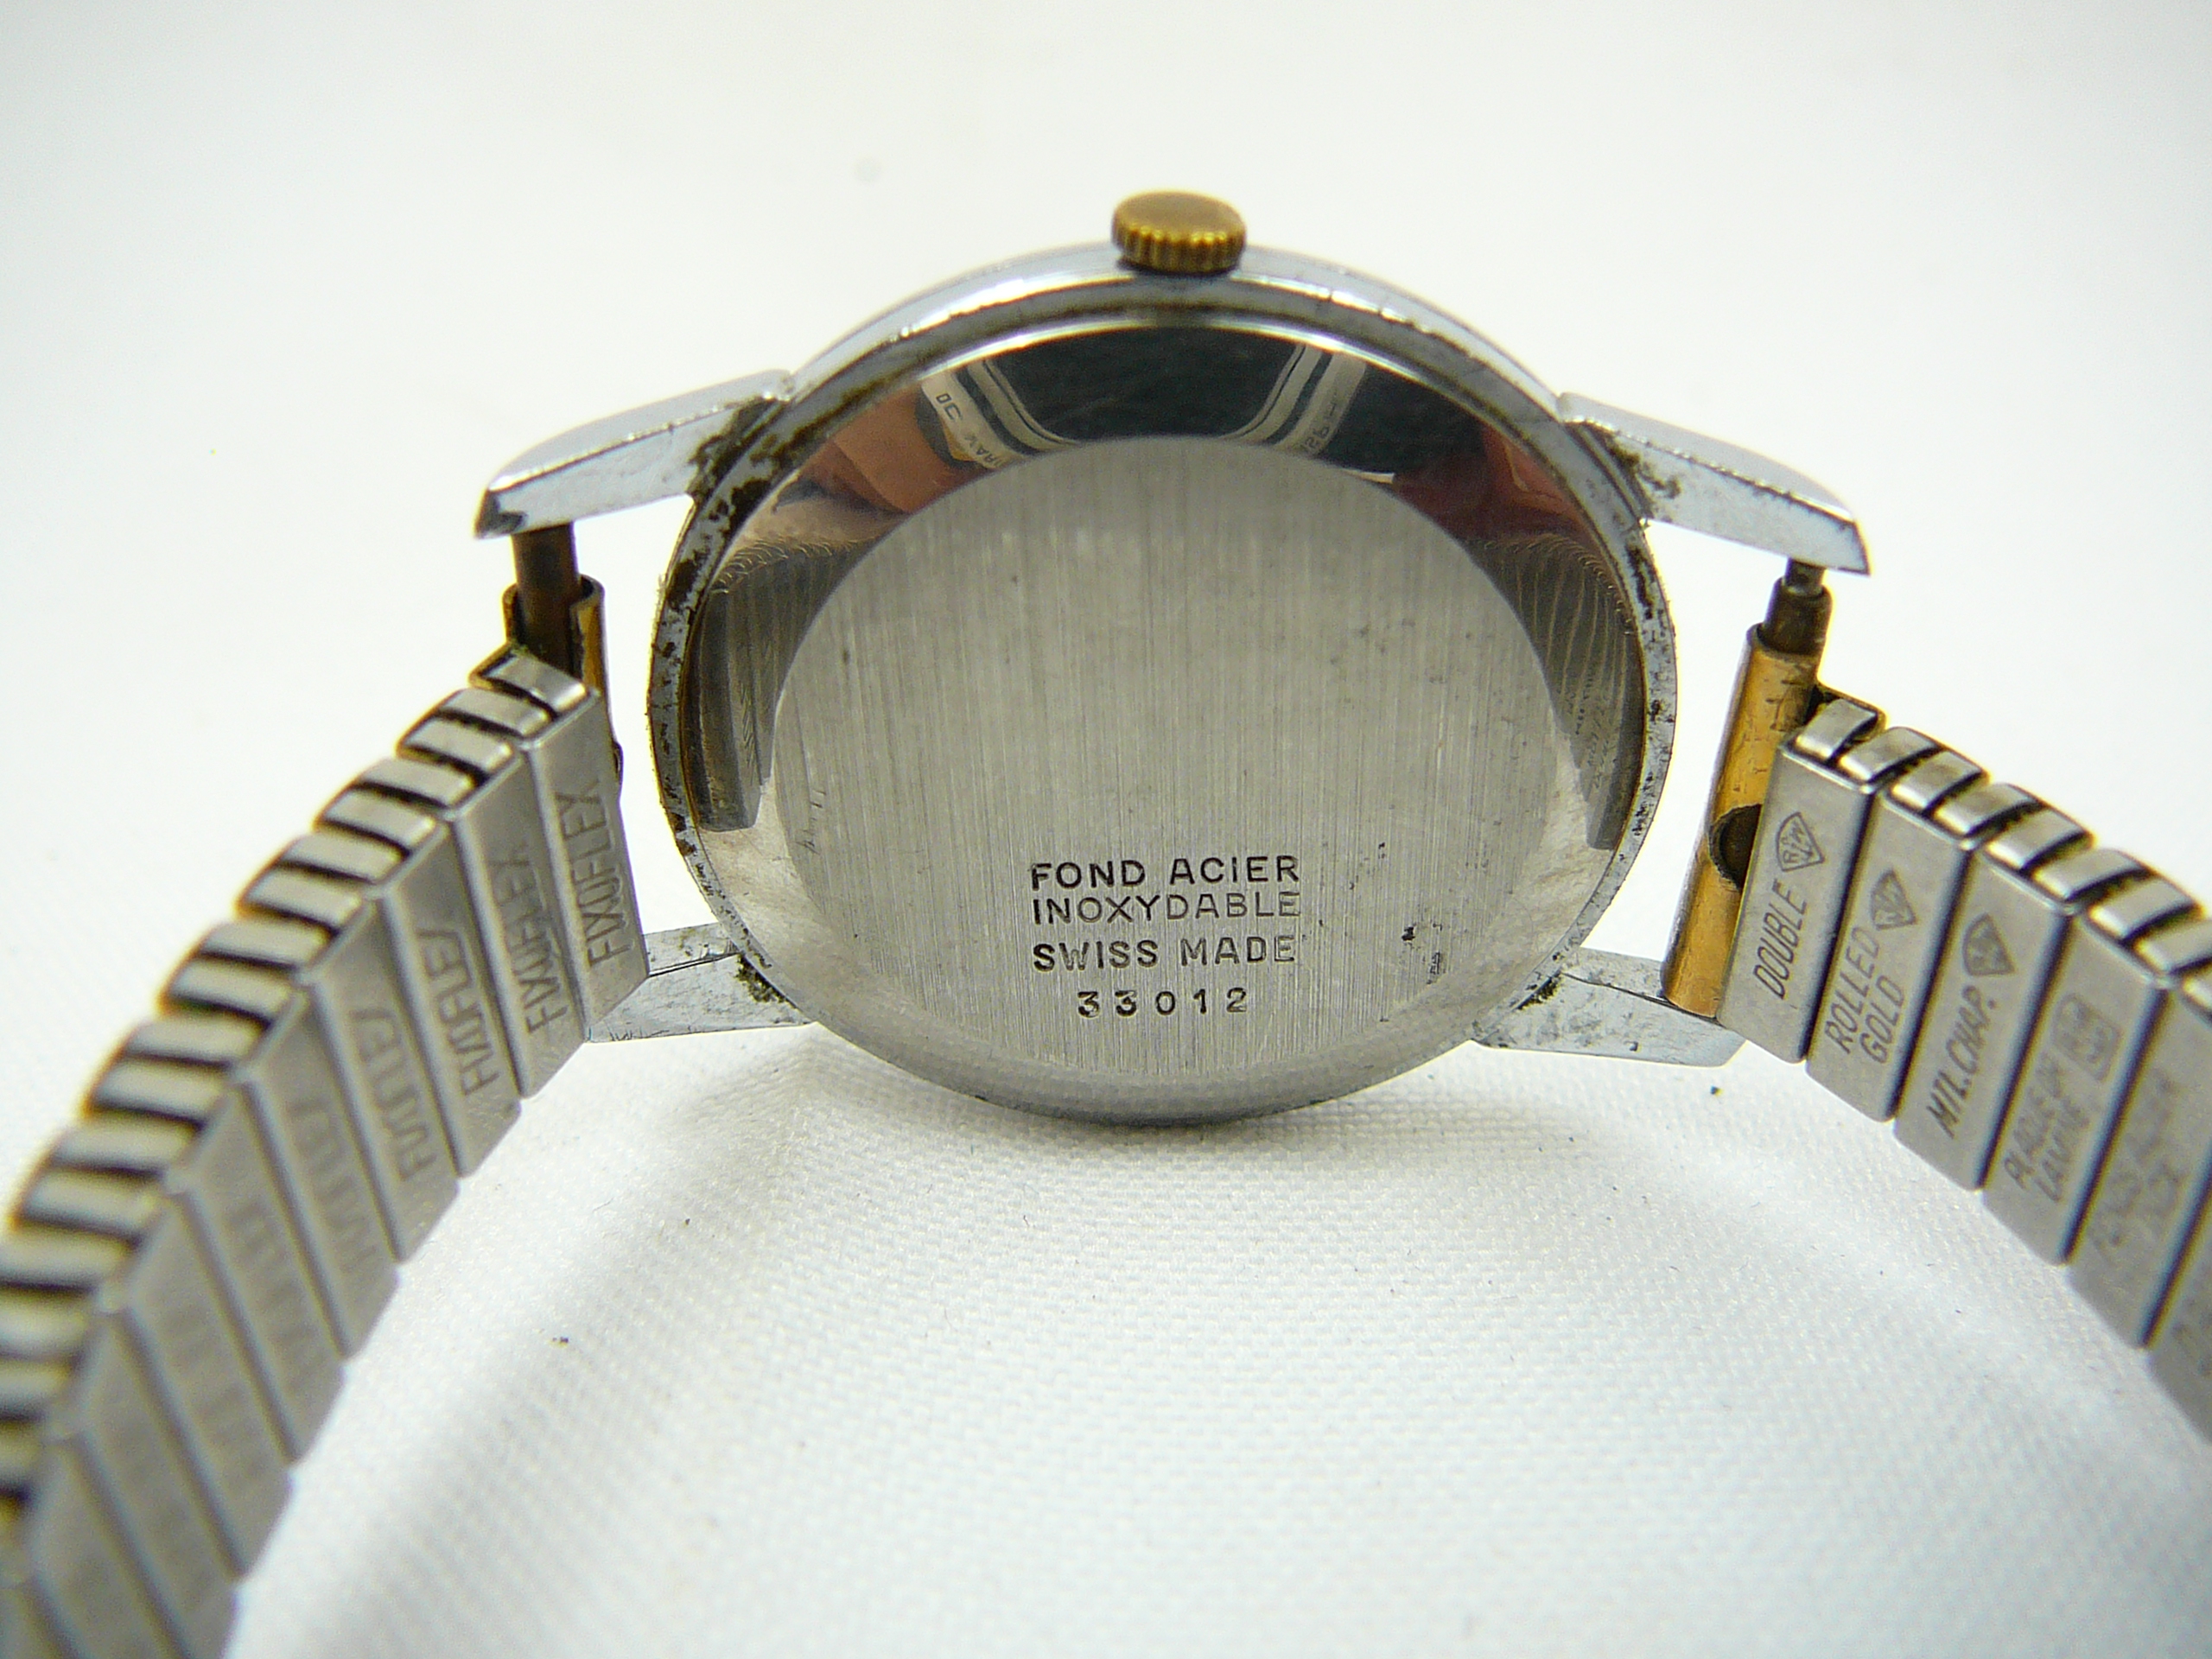 Gents vintage Berious wristwatch - Image 4 of 4